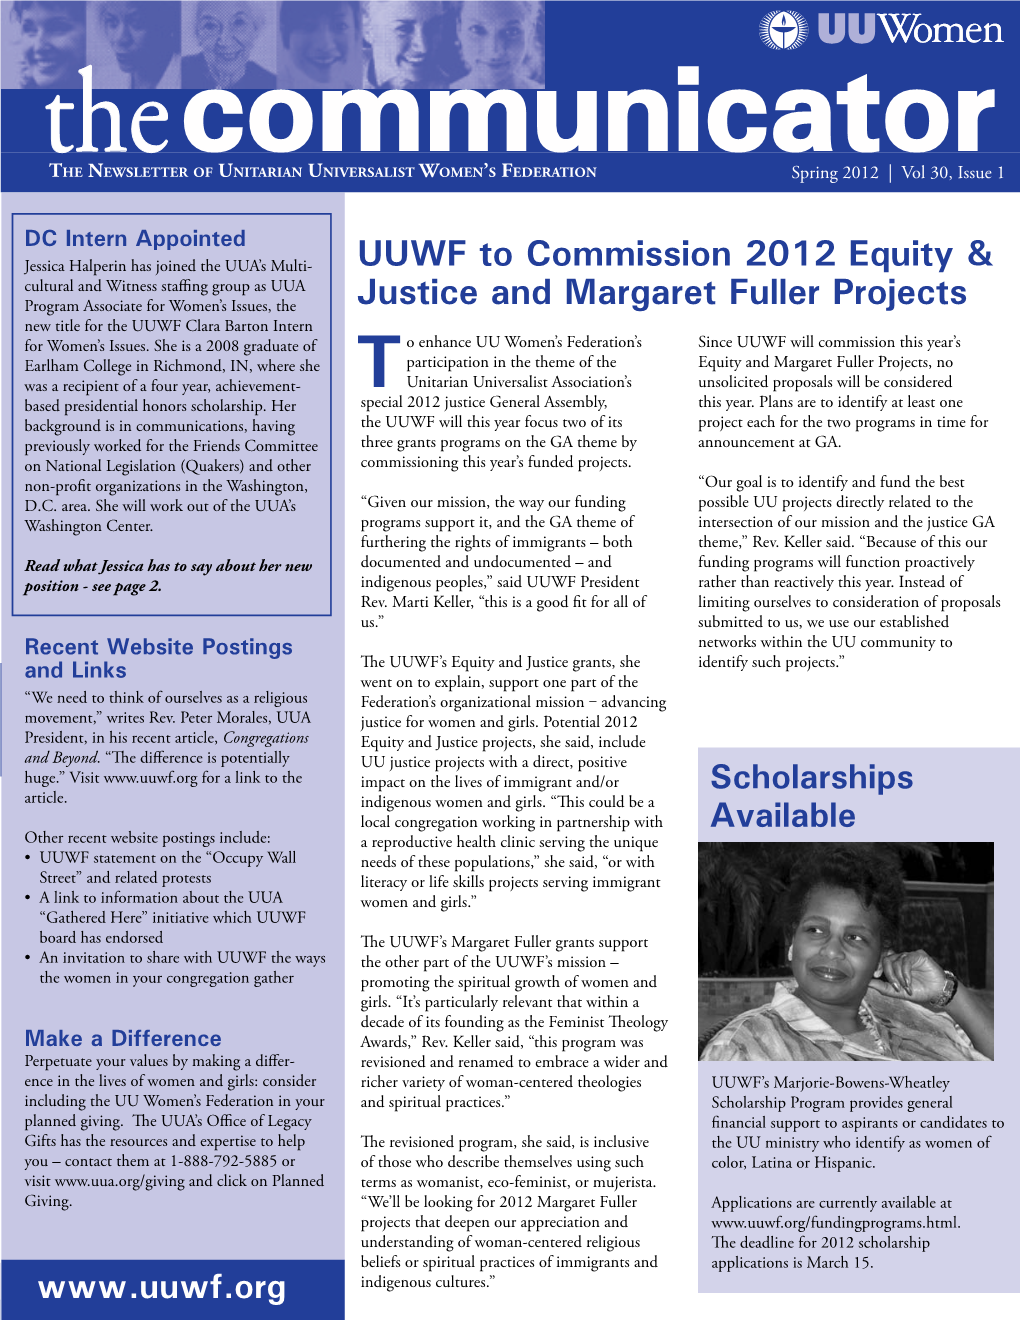 UUWF to Commission 2012 Equity & Justice and Margaret Fuller Projects